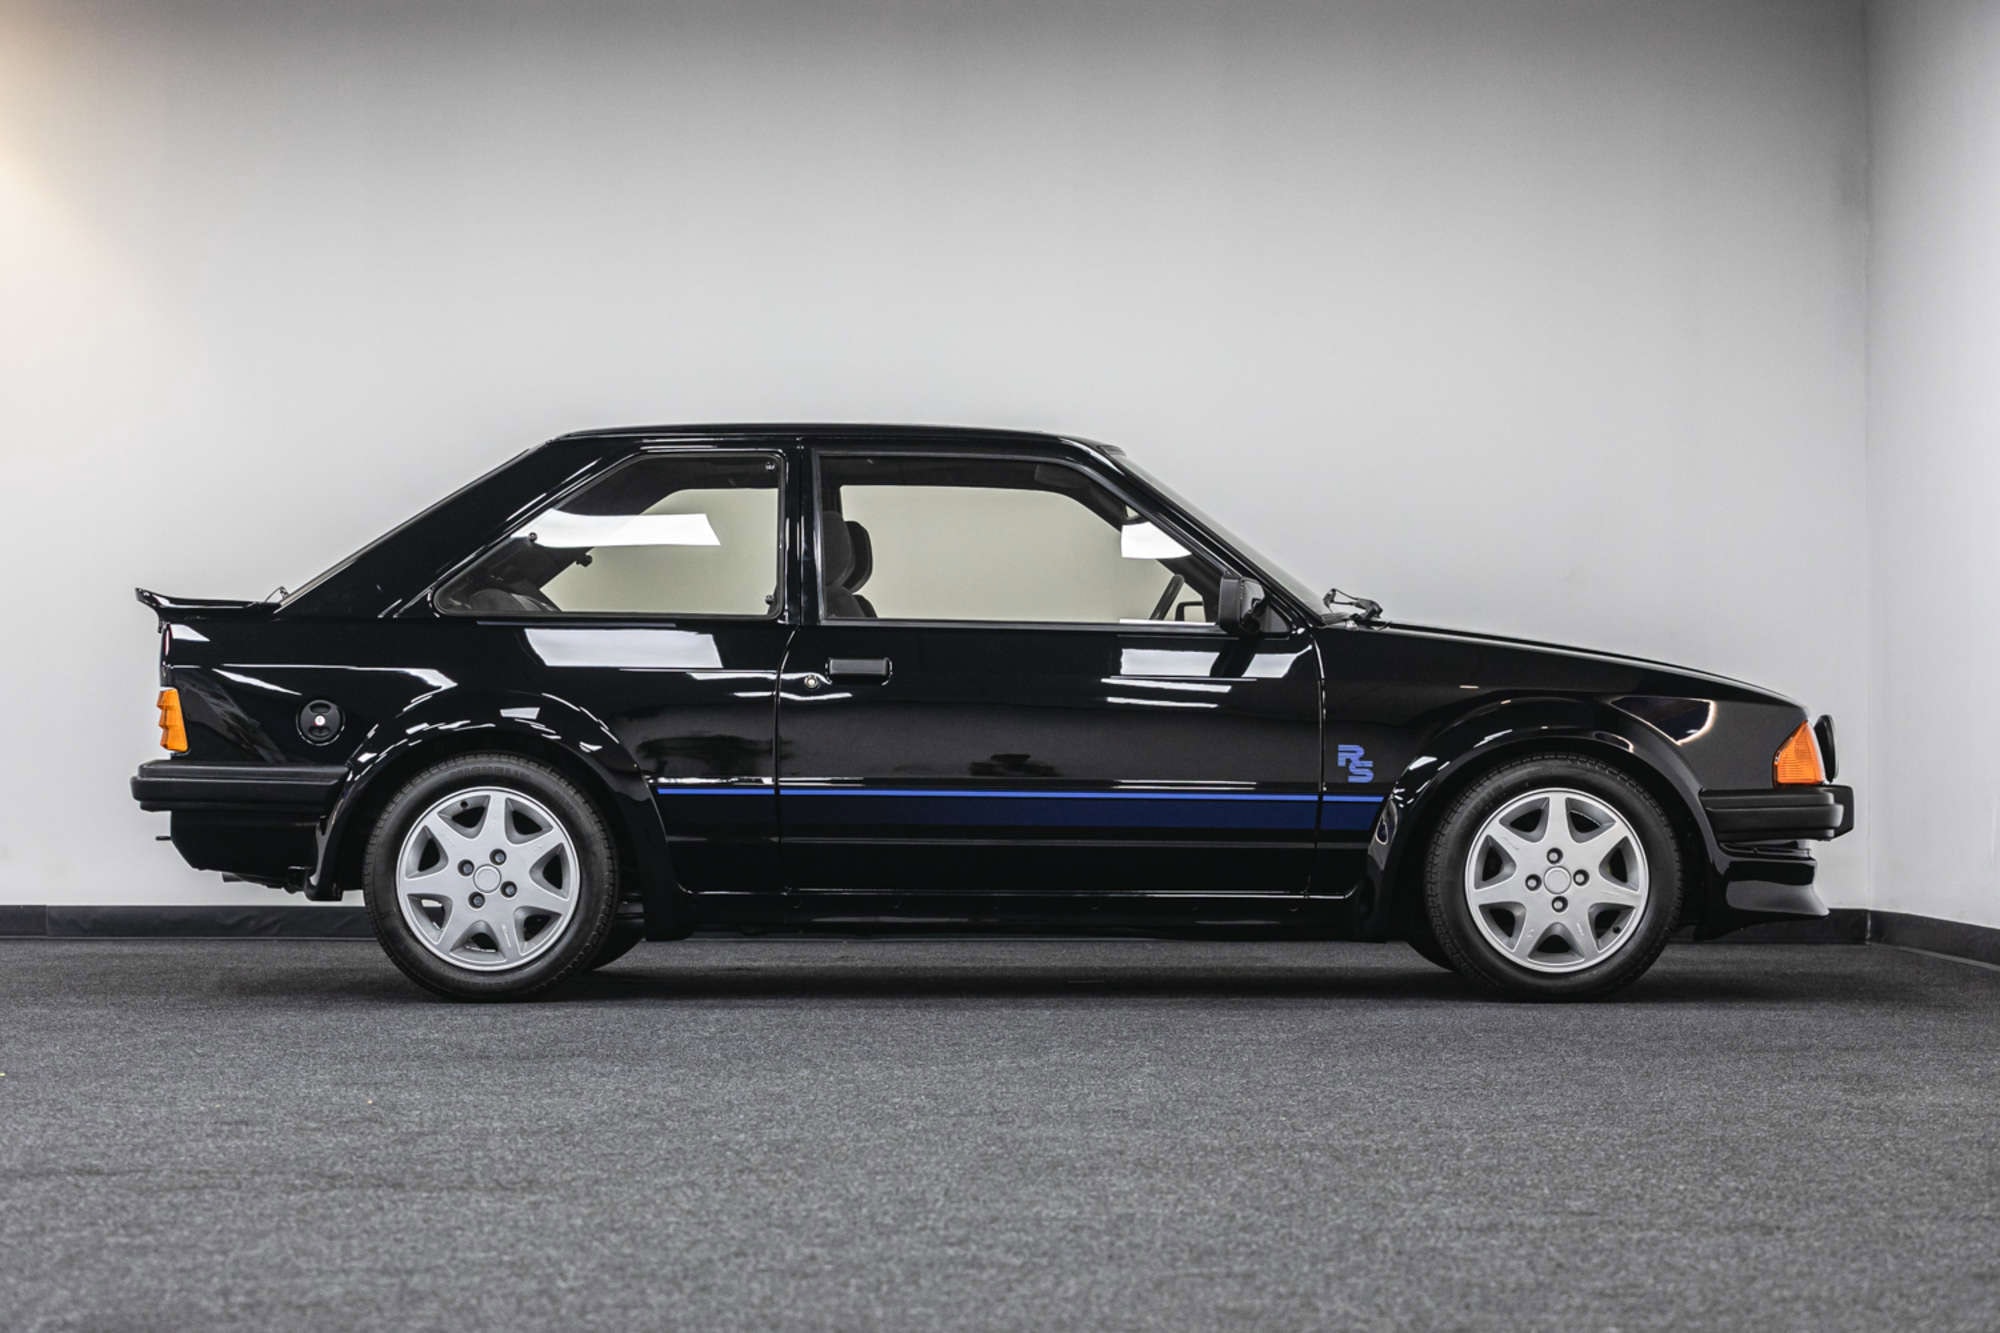 Princess Diana 1985 Ford Escort RS Turbo S1 Car Silverstone Auctions Info